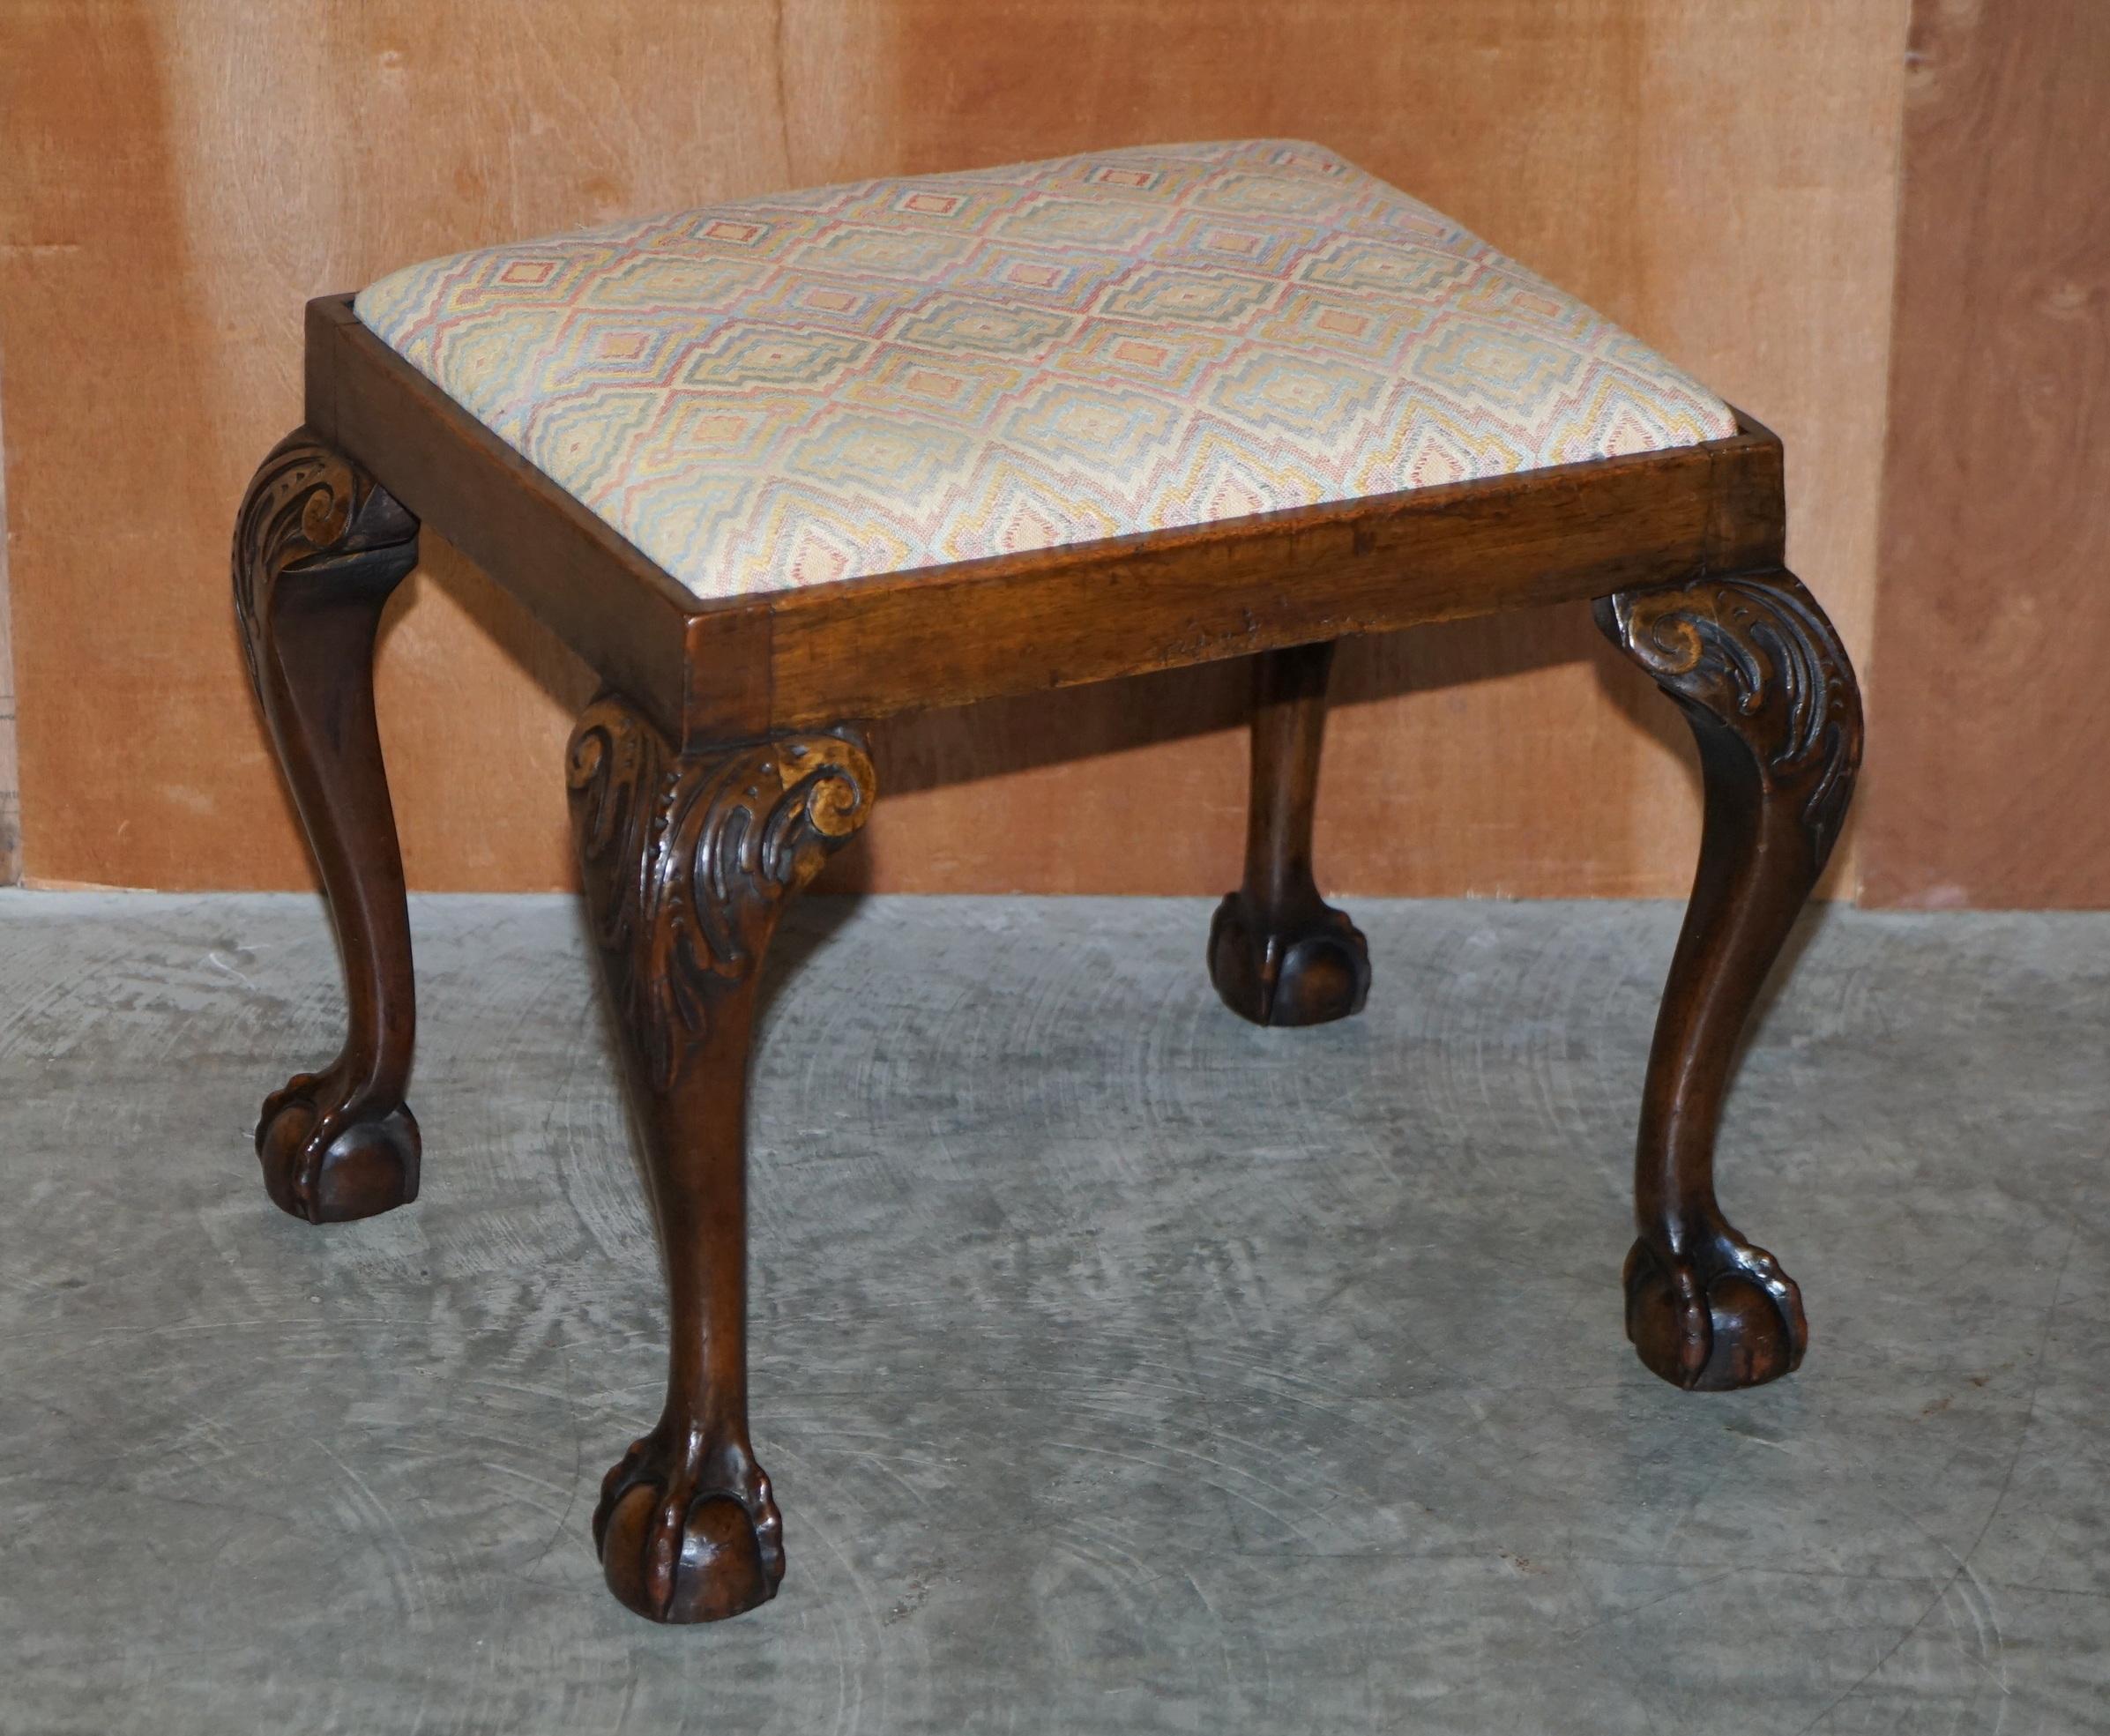 We are delighted to offer this sublime circa 1780 George II and later walnut stool with ornately carved legs and Claw & Ball feet

This piece is a very good looking well made and decorative stool with a glorious timber patina. It is just over 240